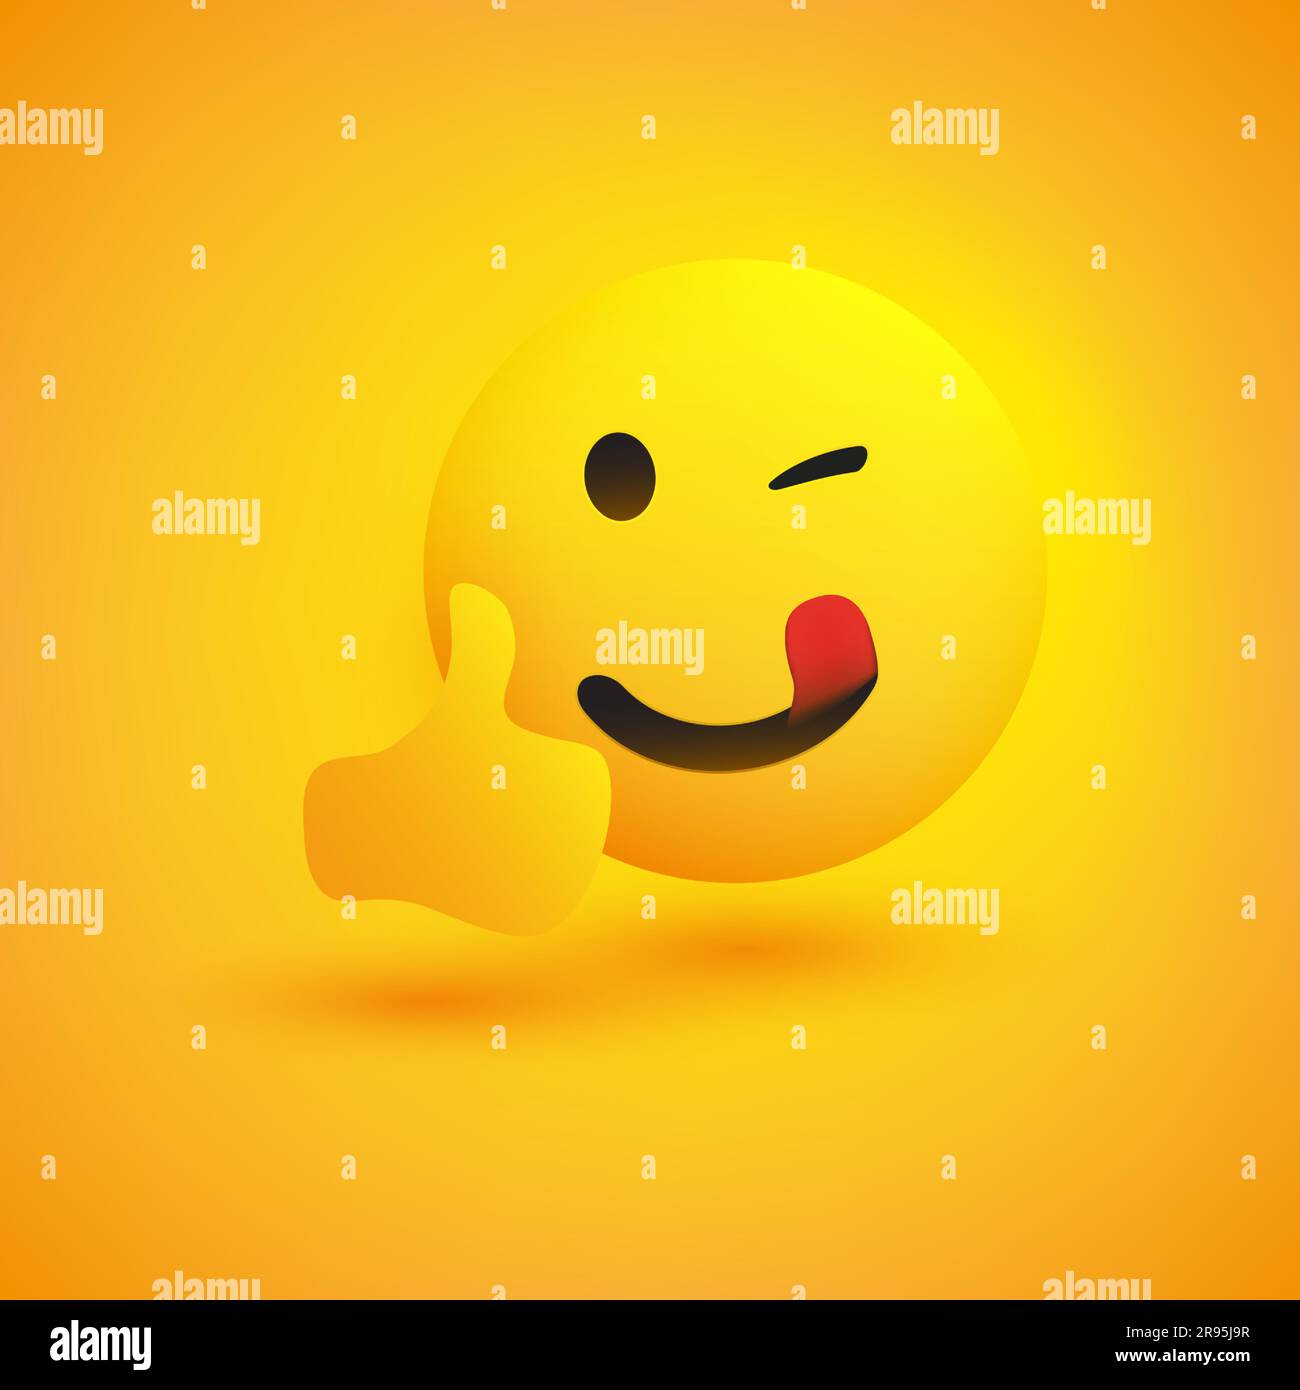 Smiling Emoji - Simple Happy Emoticon with Winking Eye Showing Thumbs Up - Vector Design Stock Vector